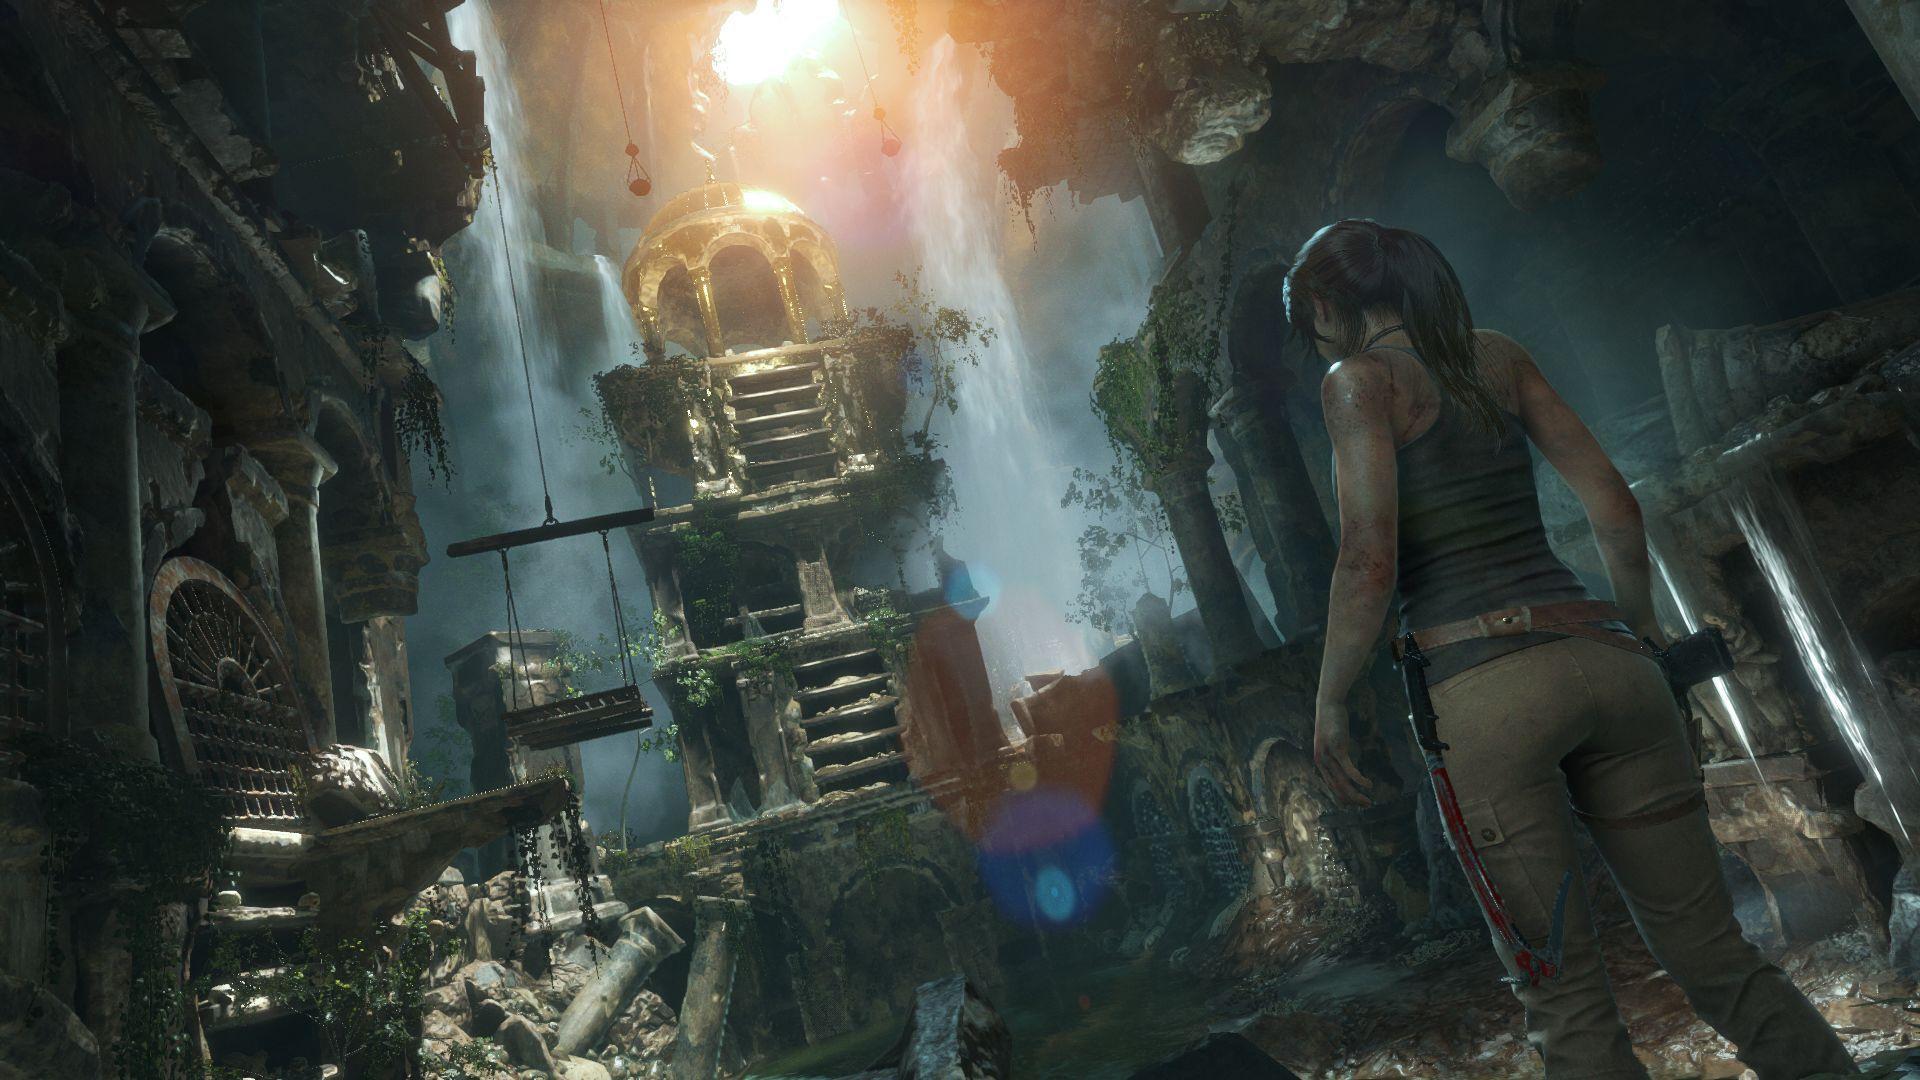 Rise of the Tomb Raider releases same day as Fallout 4, Director